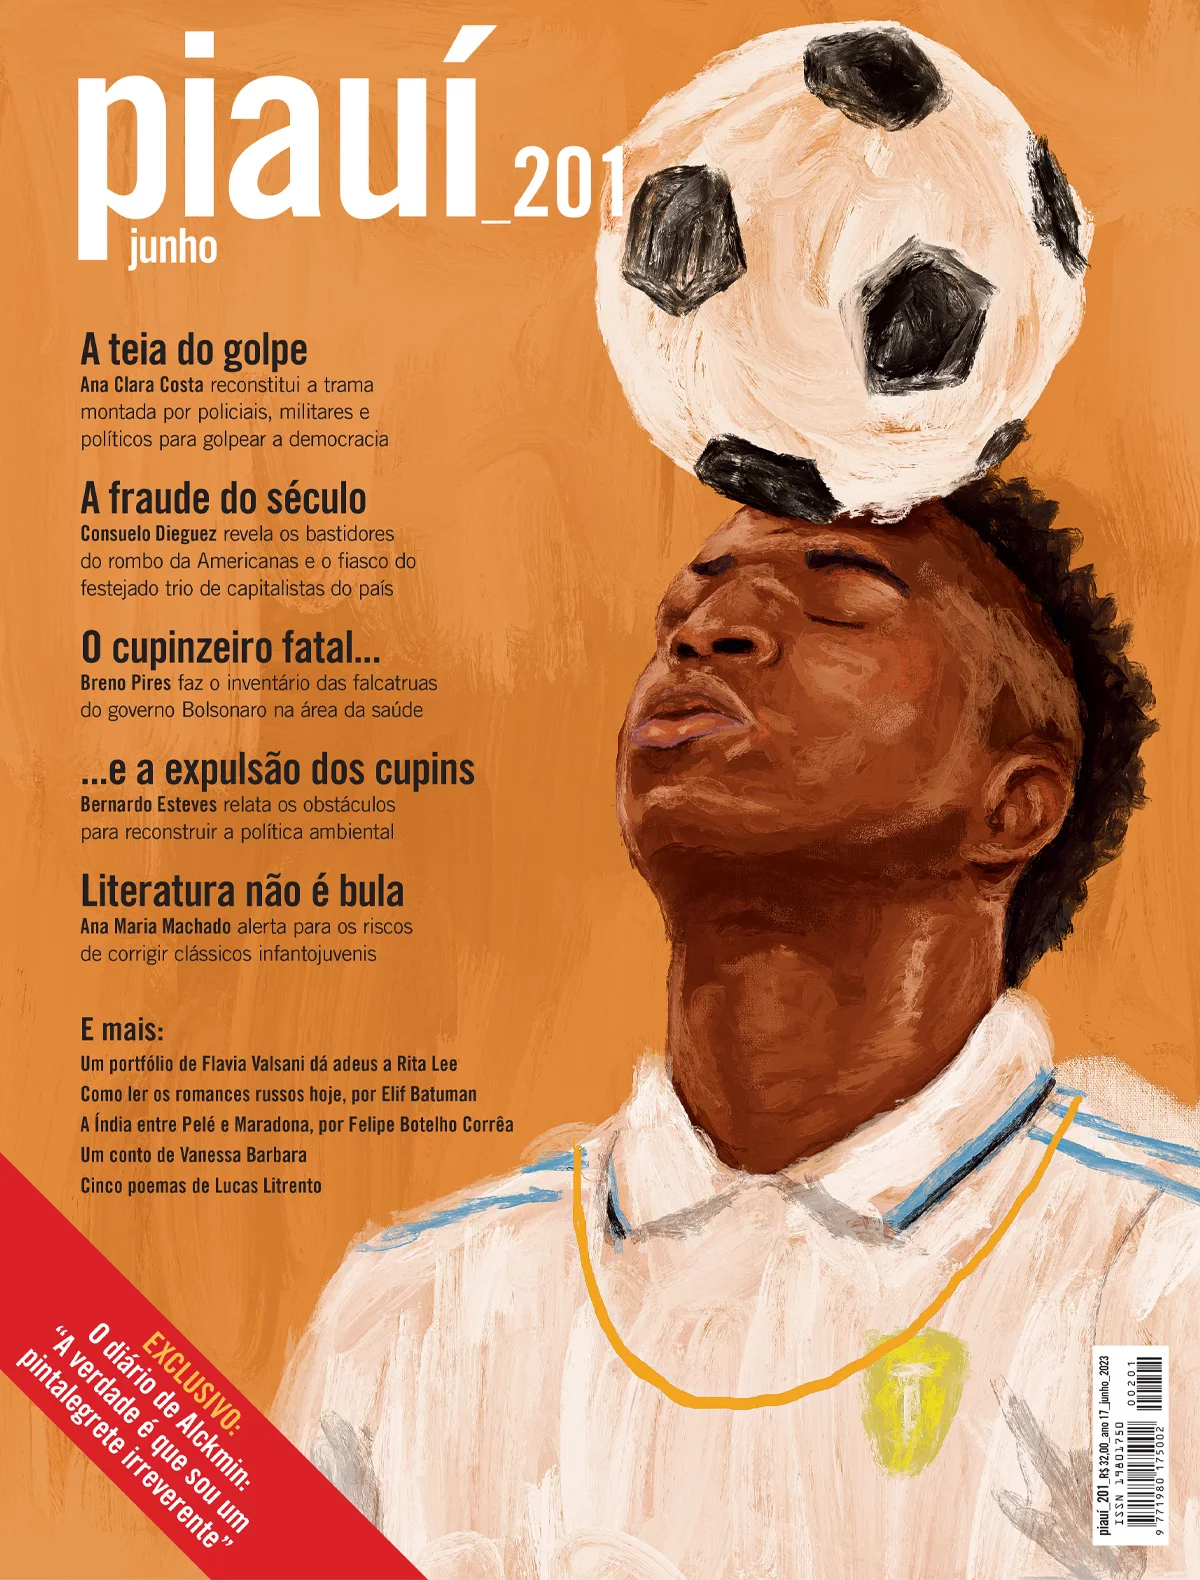 The cover of a magazine with soccer playber Vini Jr. holding a ball on his head